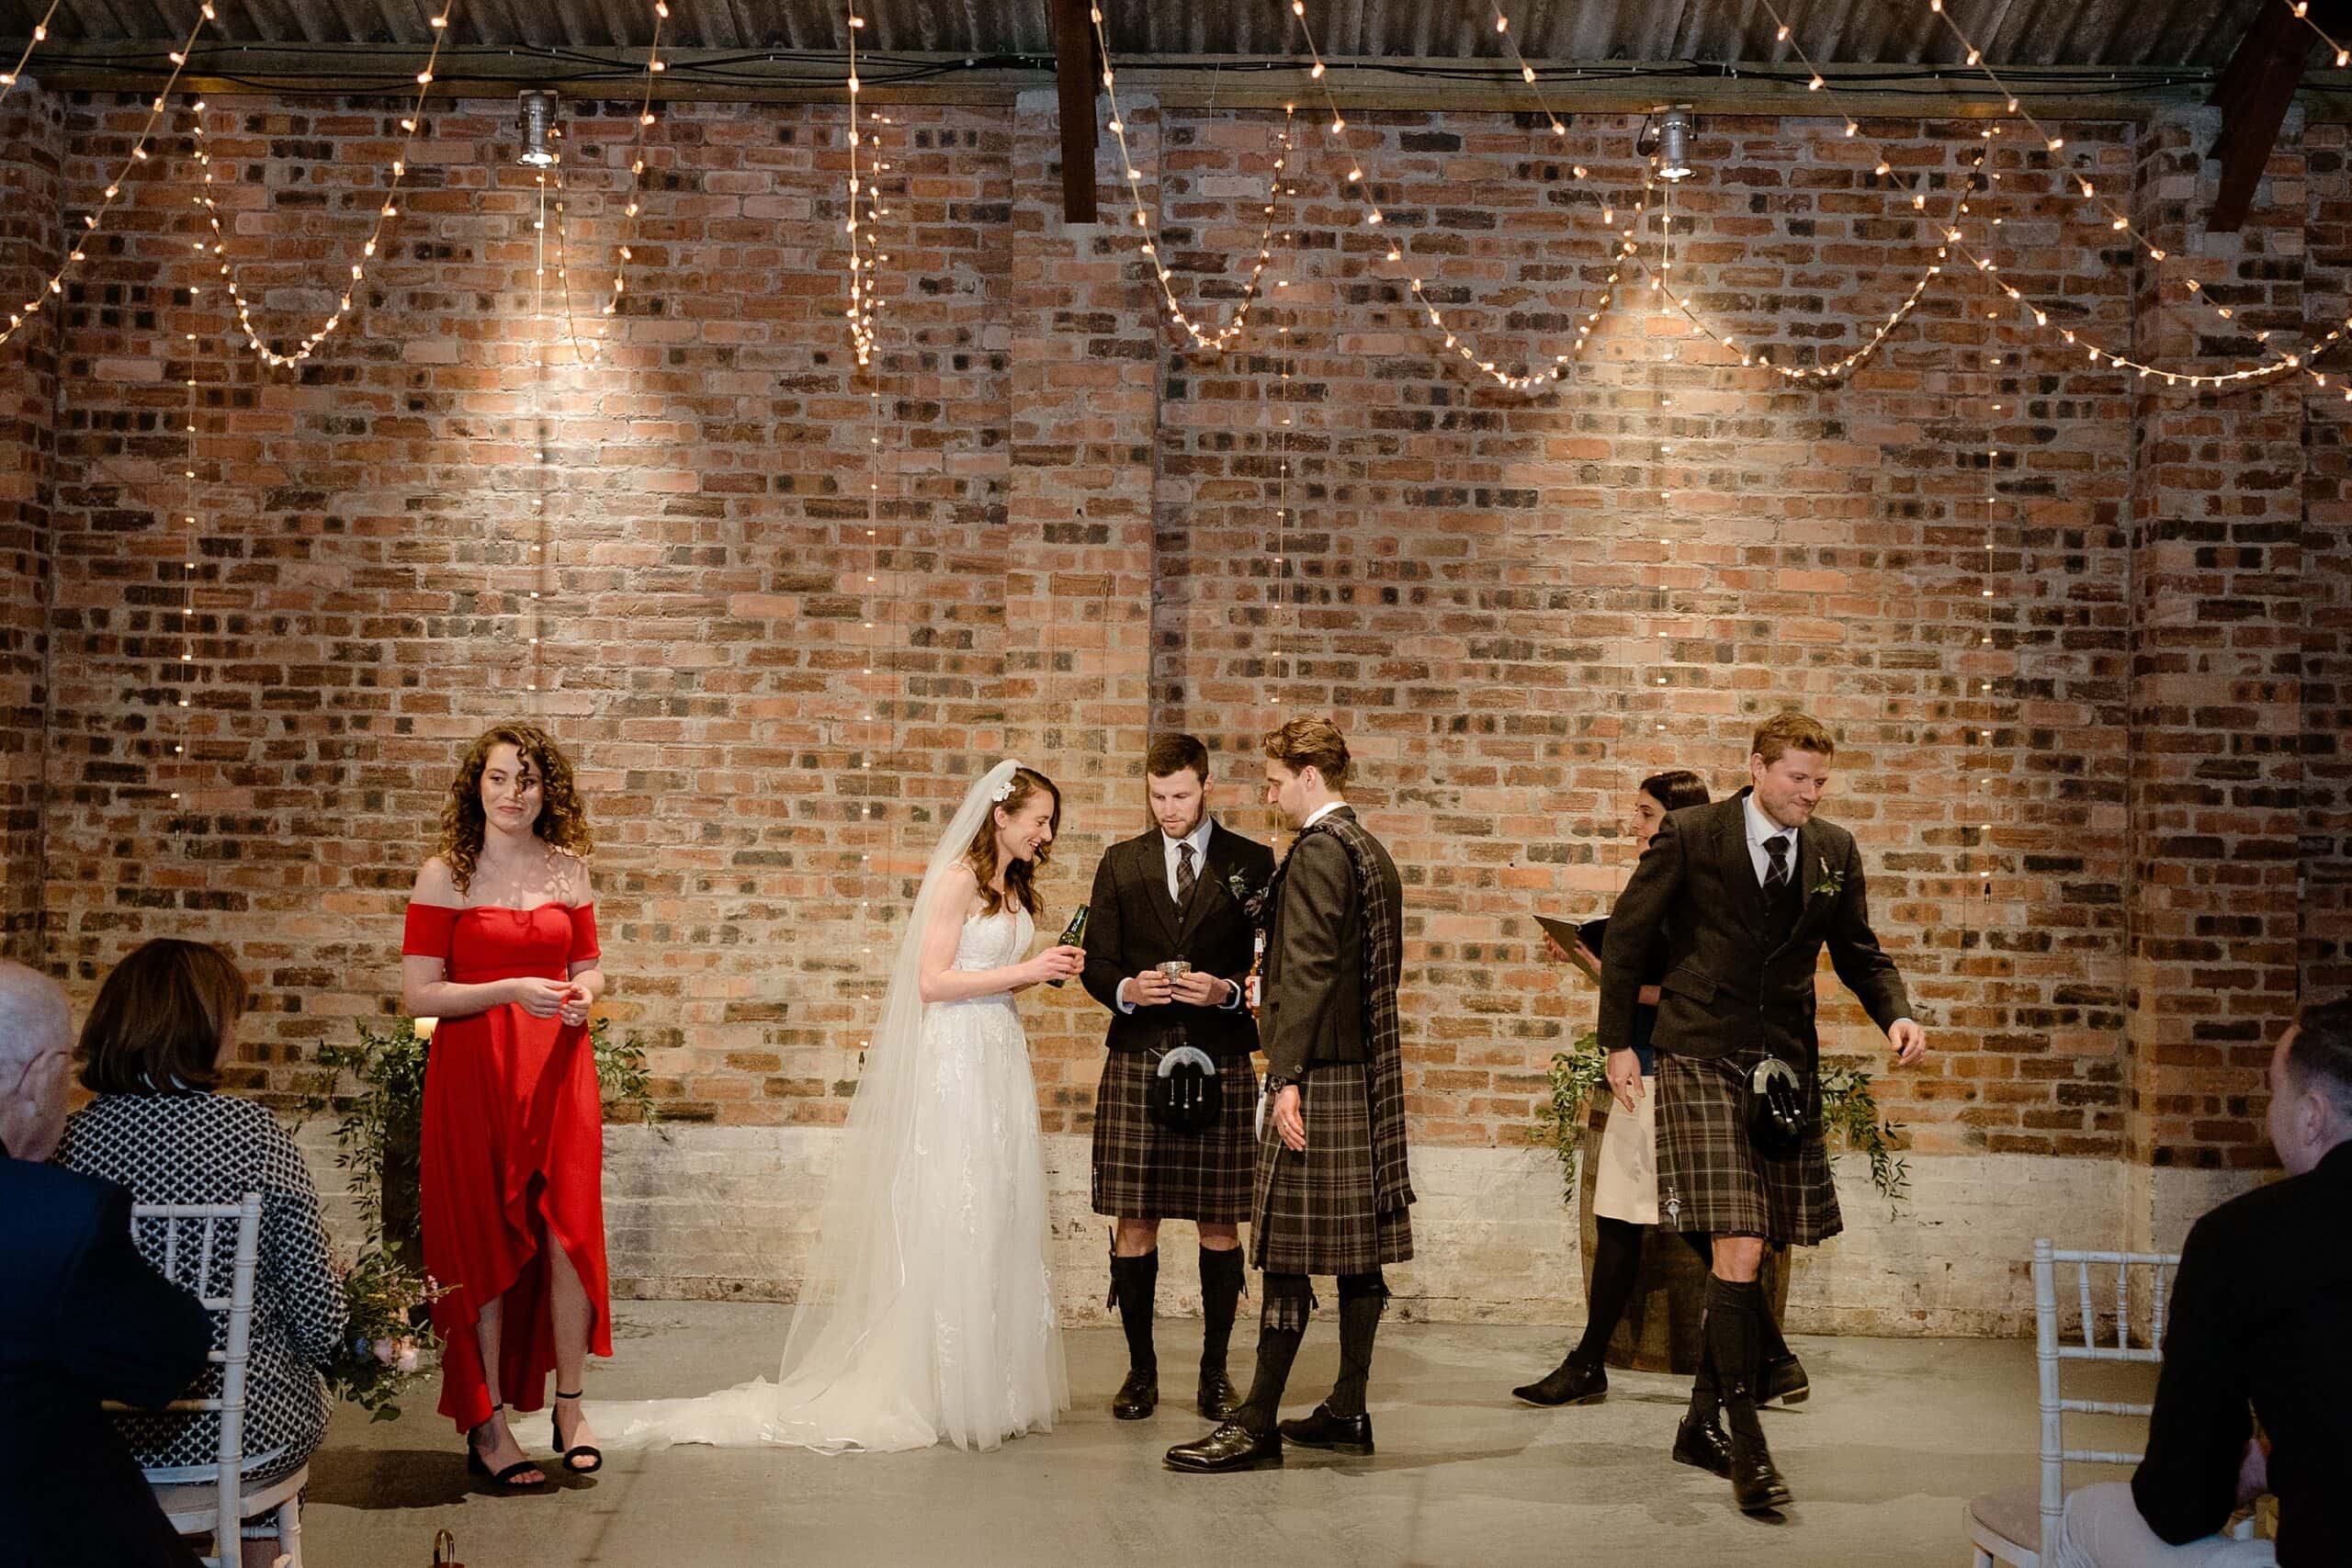 the bride and groom taking part in a quaich ceremony with a red brick wall in the background and festoon lights above in st andrews scotland